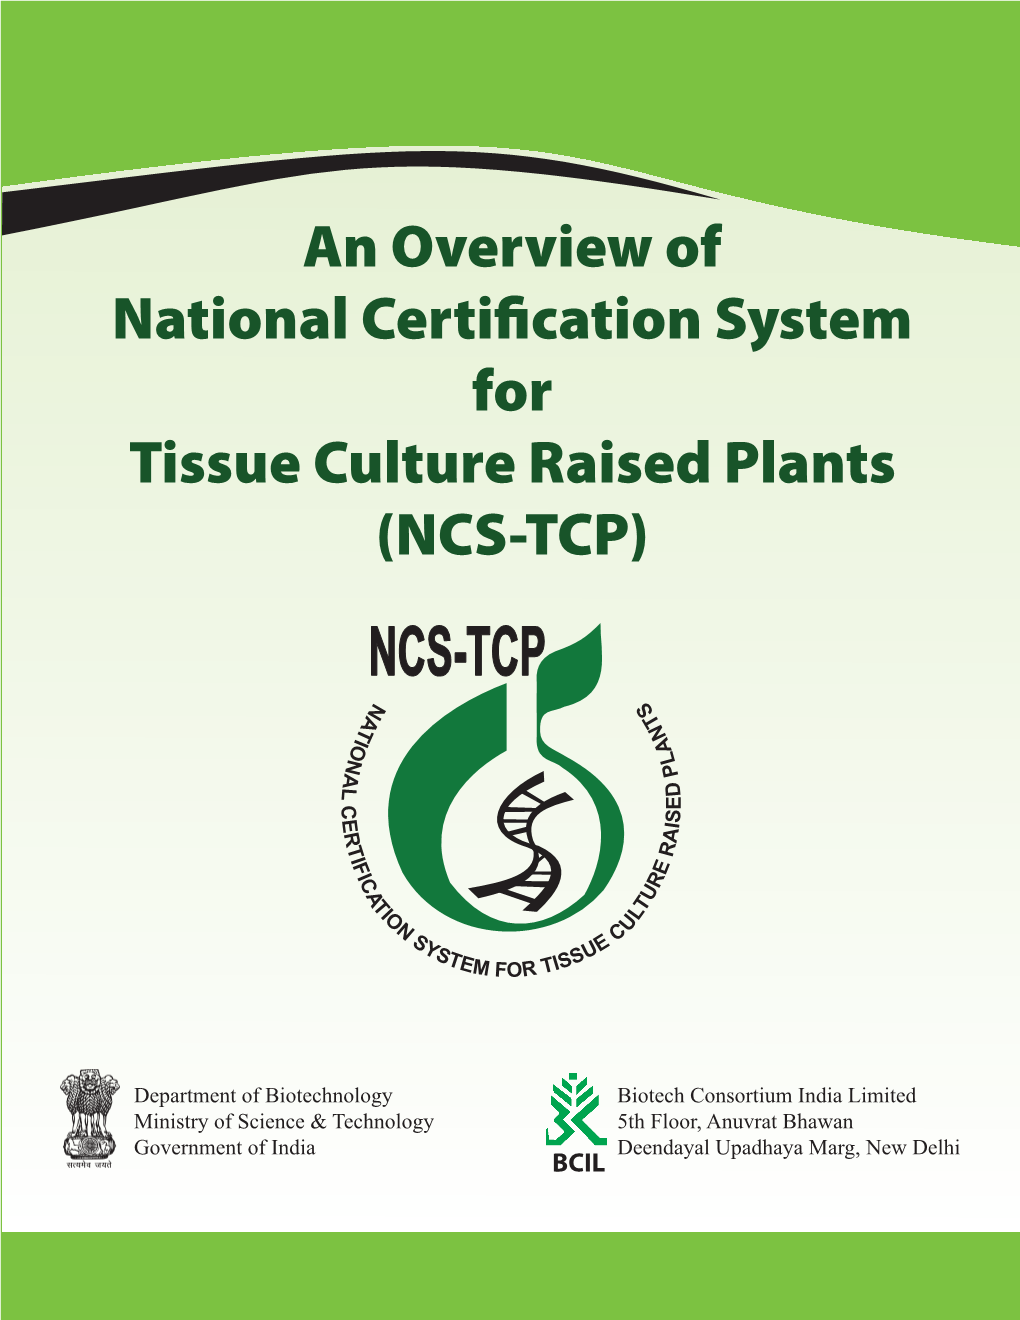 An Overview of National Certification System for Tissue Culture Raised Plants (NCS-TCP)